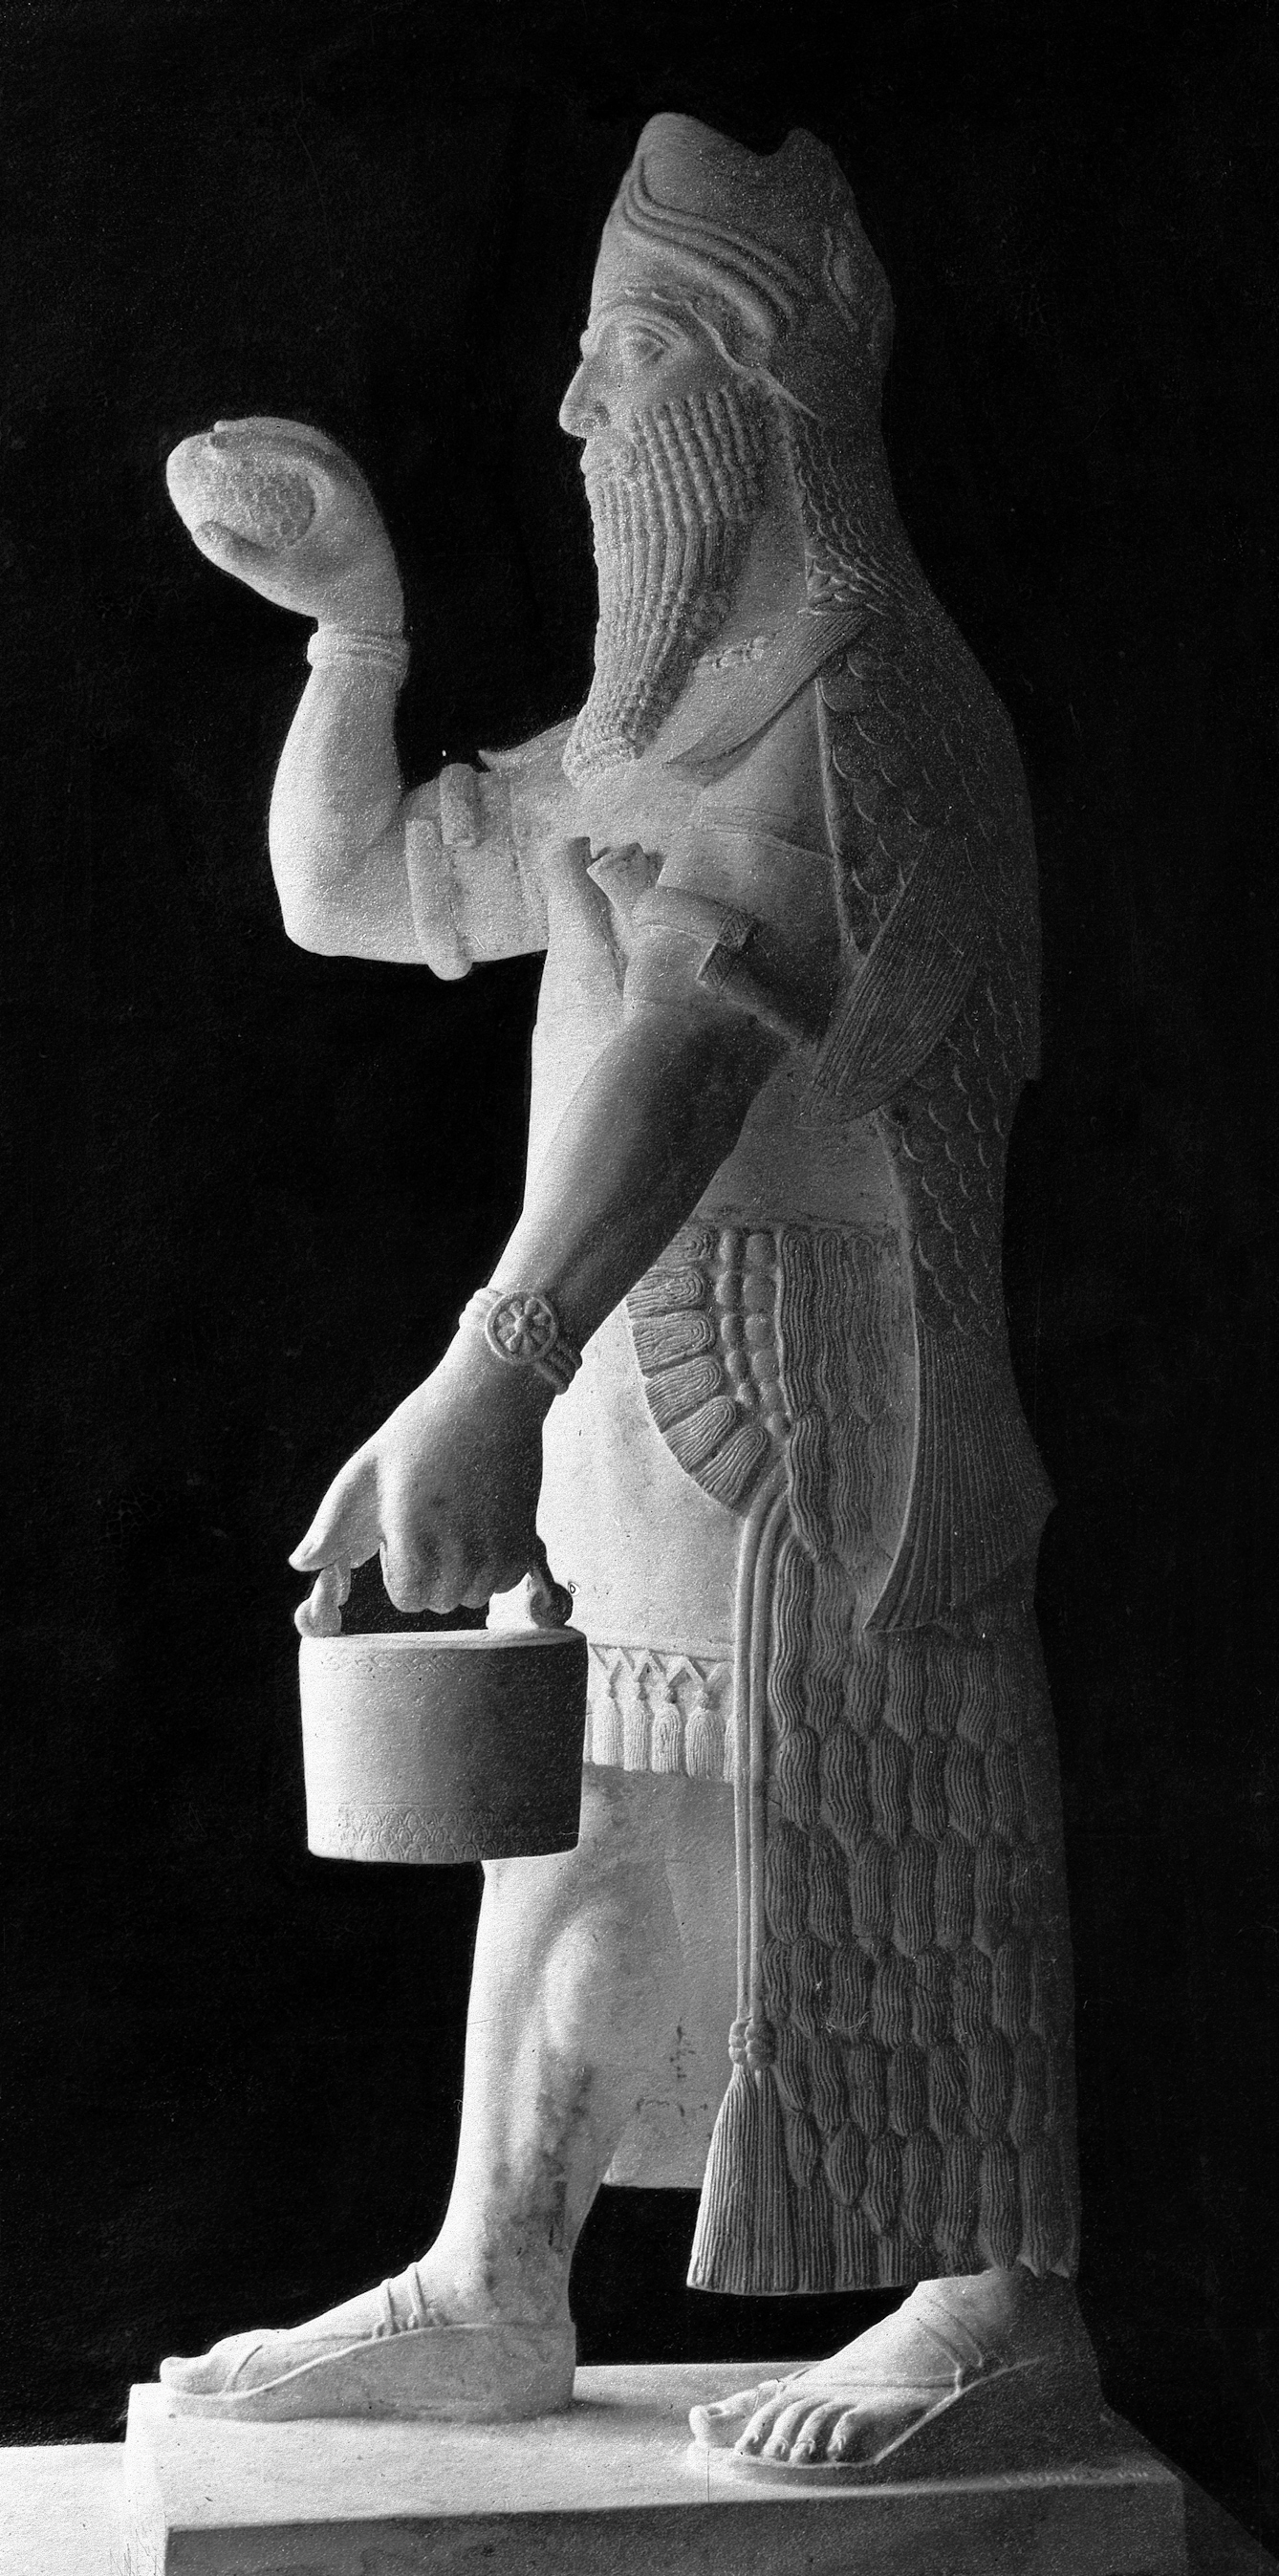 Black and white photograph of a statue depicting a man wearing sandals and a cloak that has a fish-scale texture. He is holding some sort of bucket.